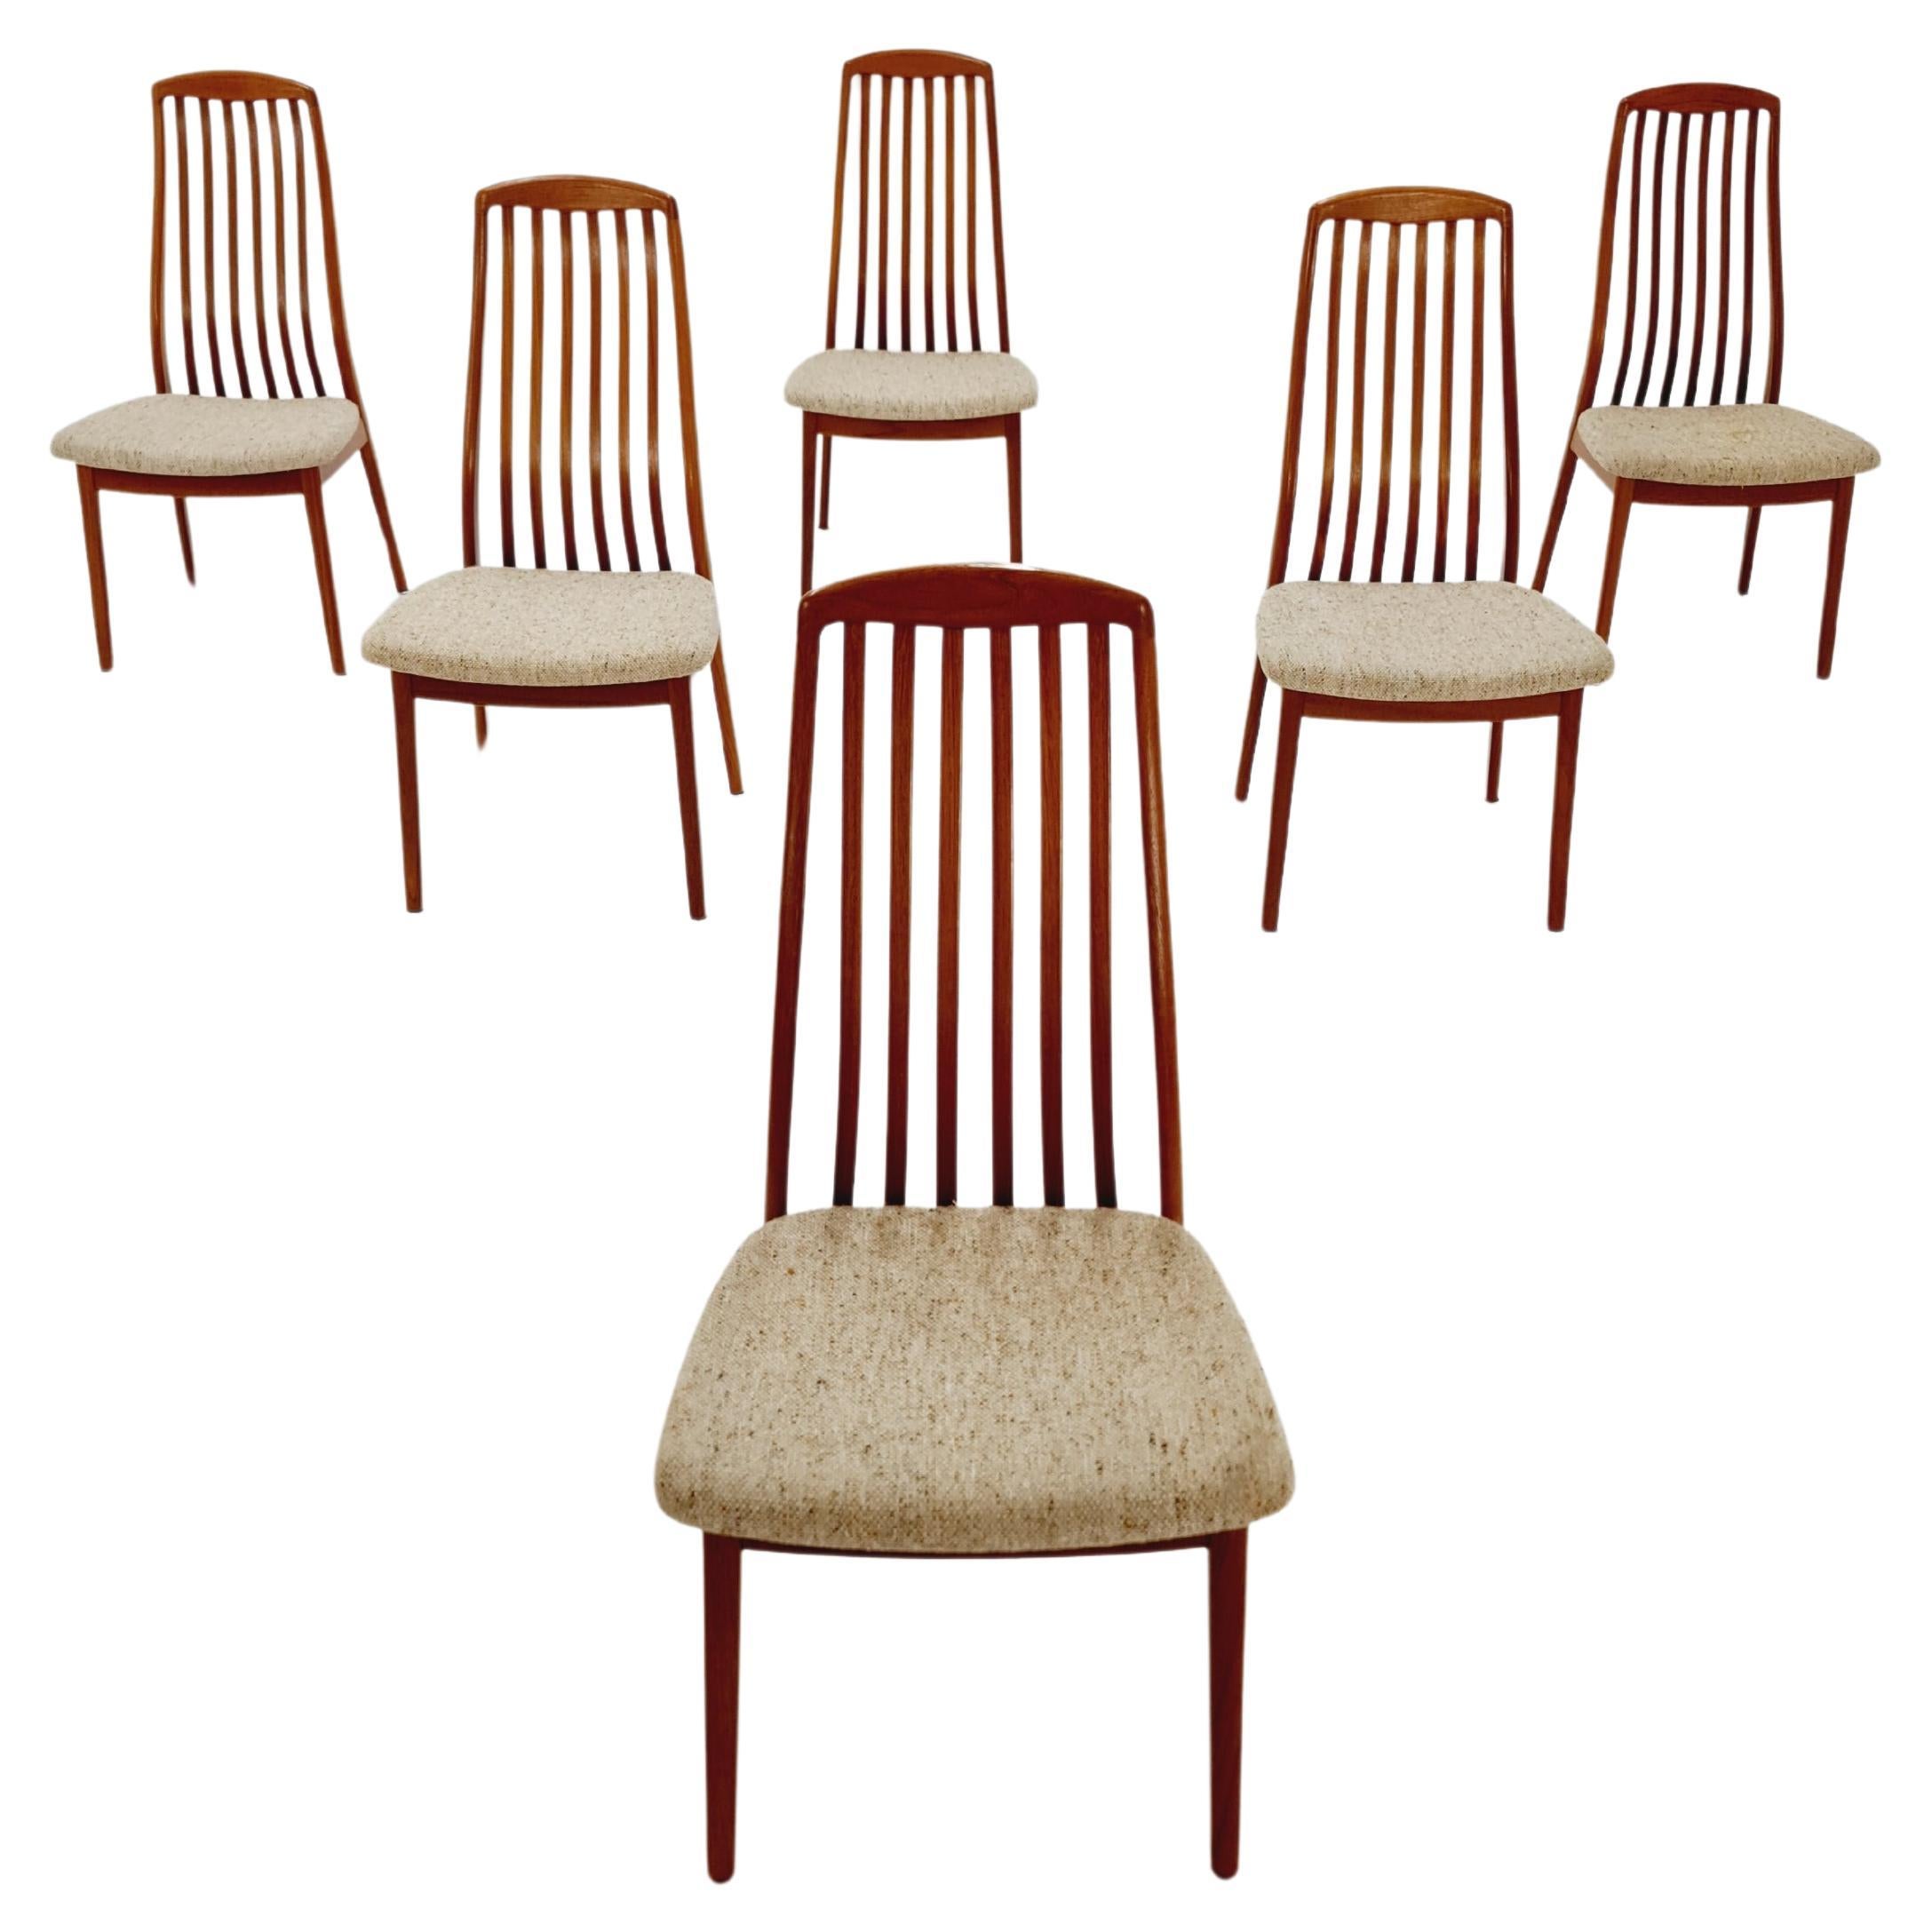 Danish teak dining chairs by Schou Andersen 1960s, set of 6 For Sale